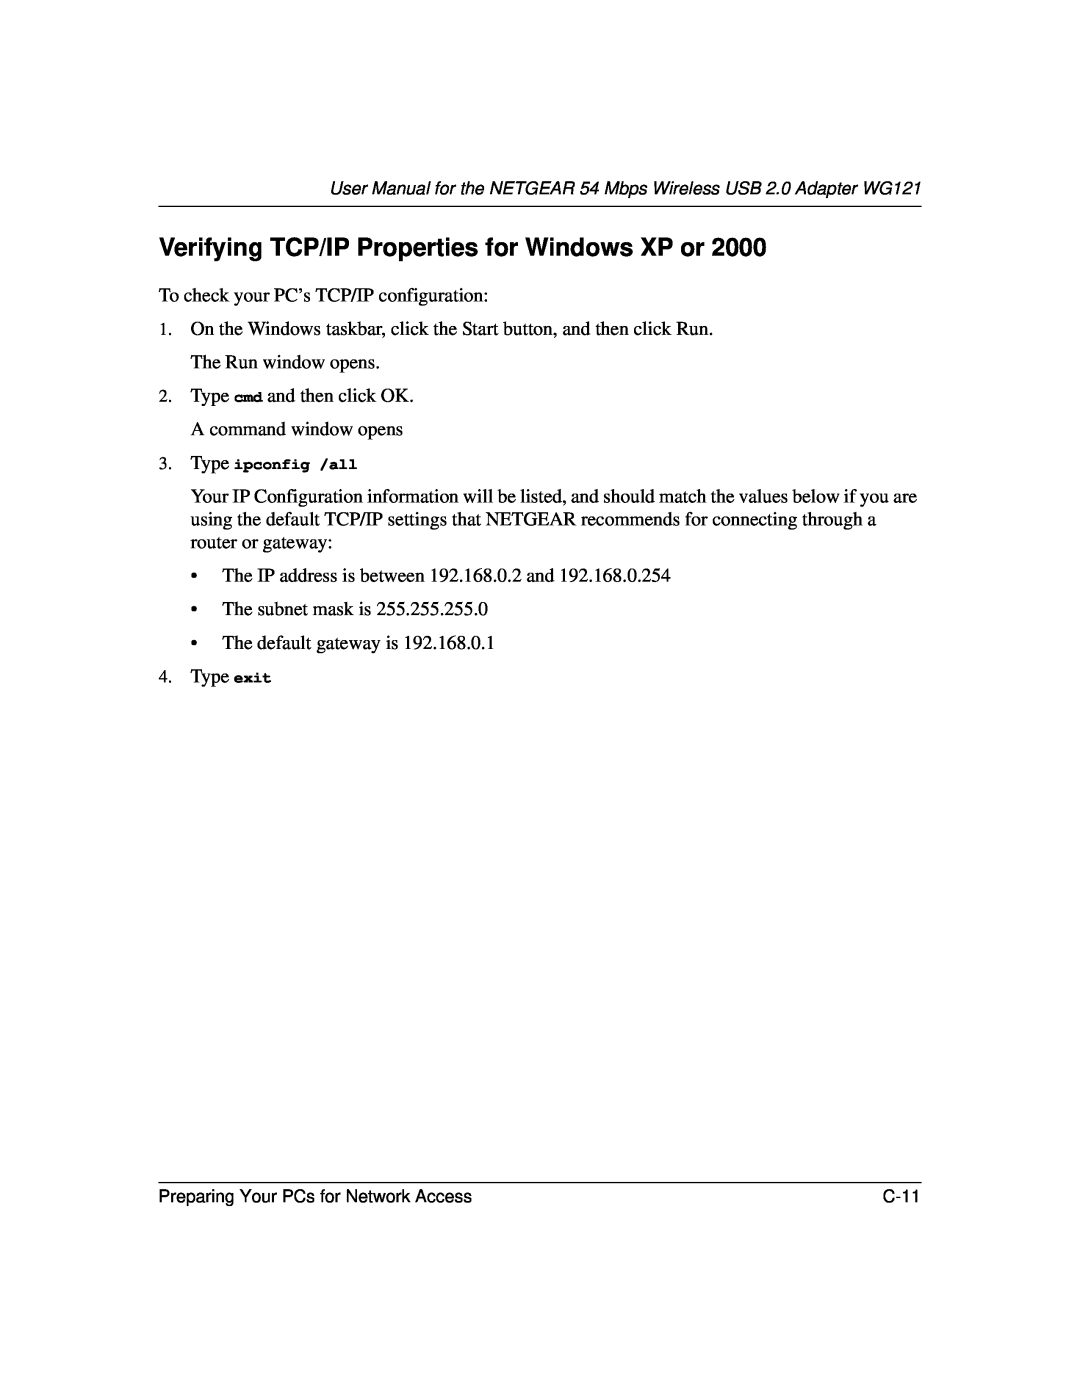 NETGEAR WG121 user manual Verifying TCP/IP Properties for Windows XP or, Type ipconfig /all 